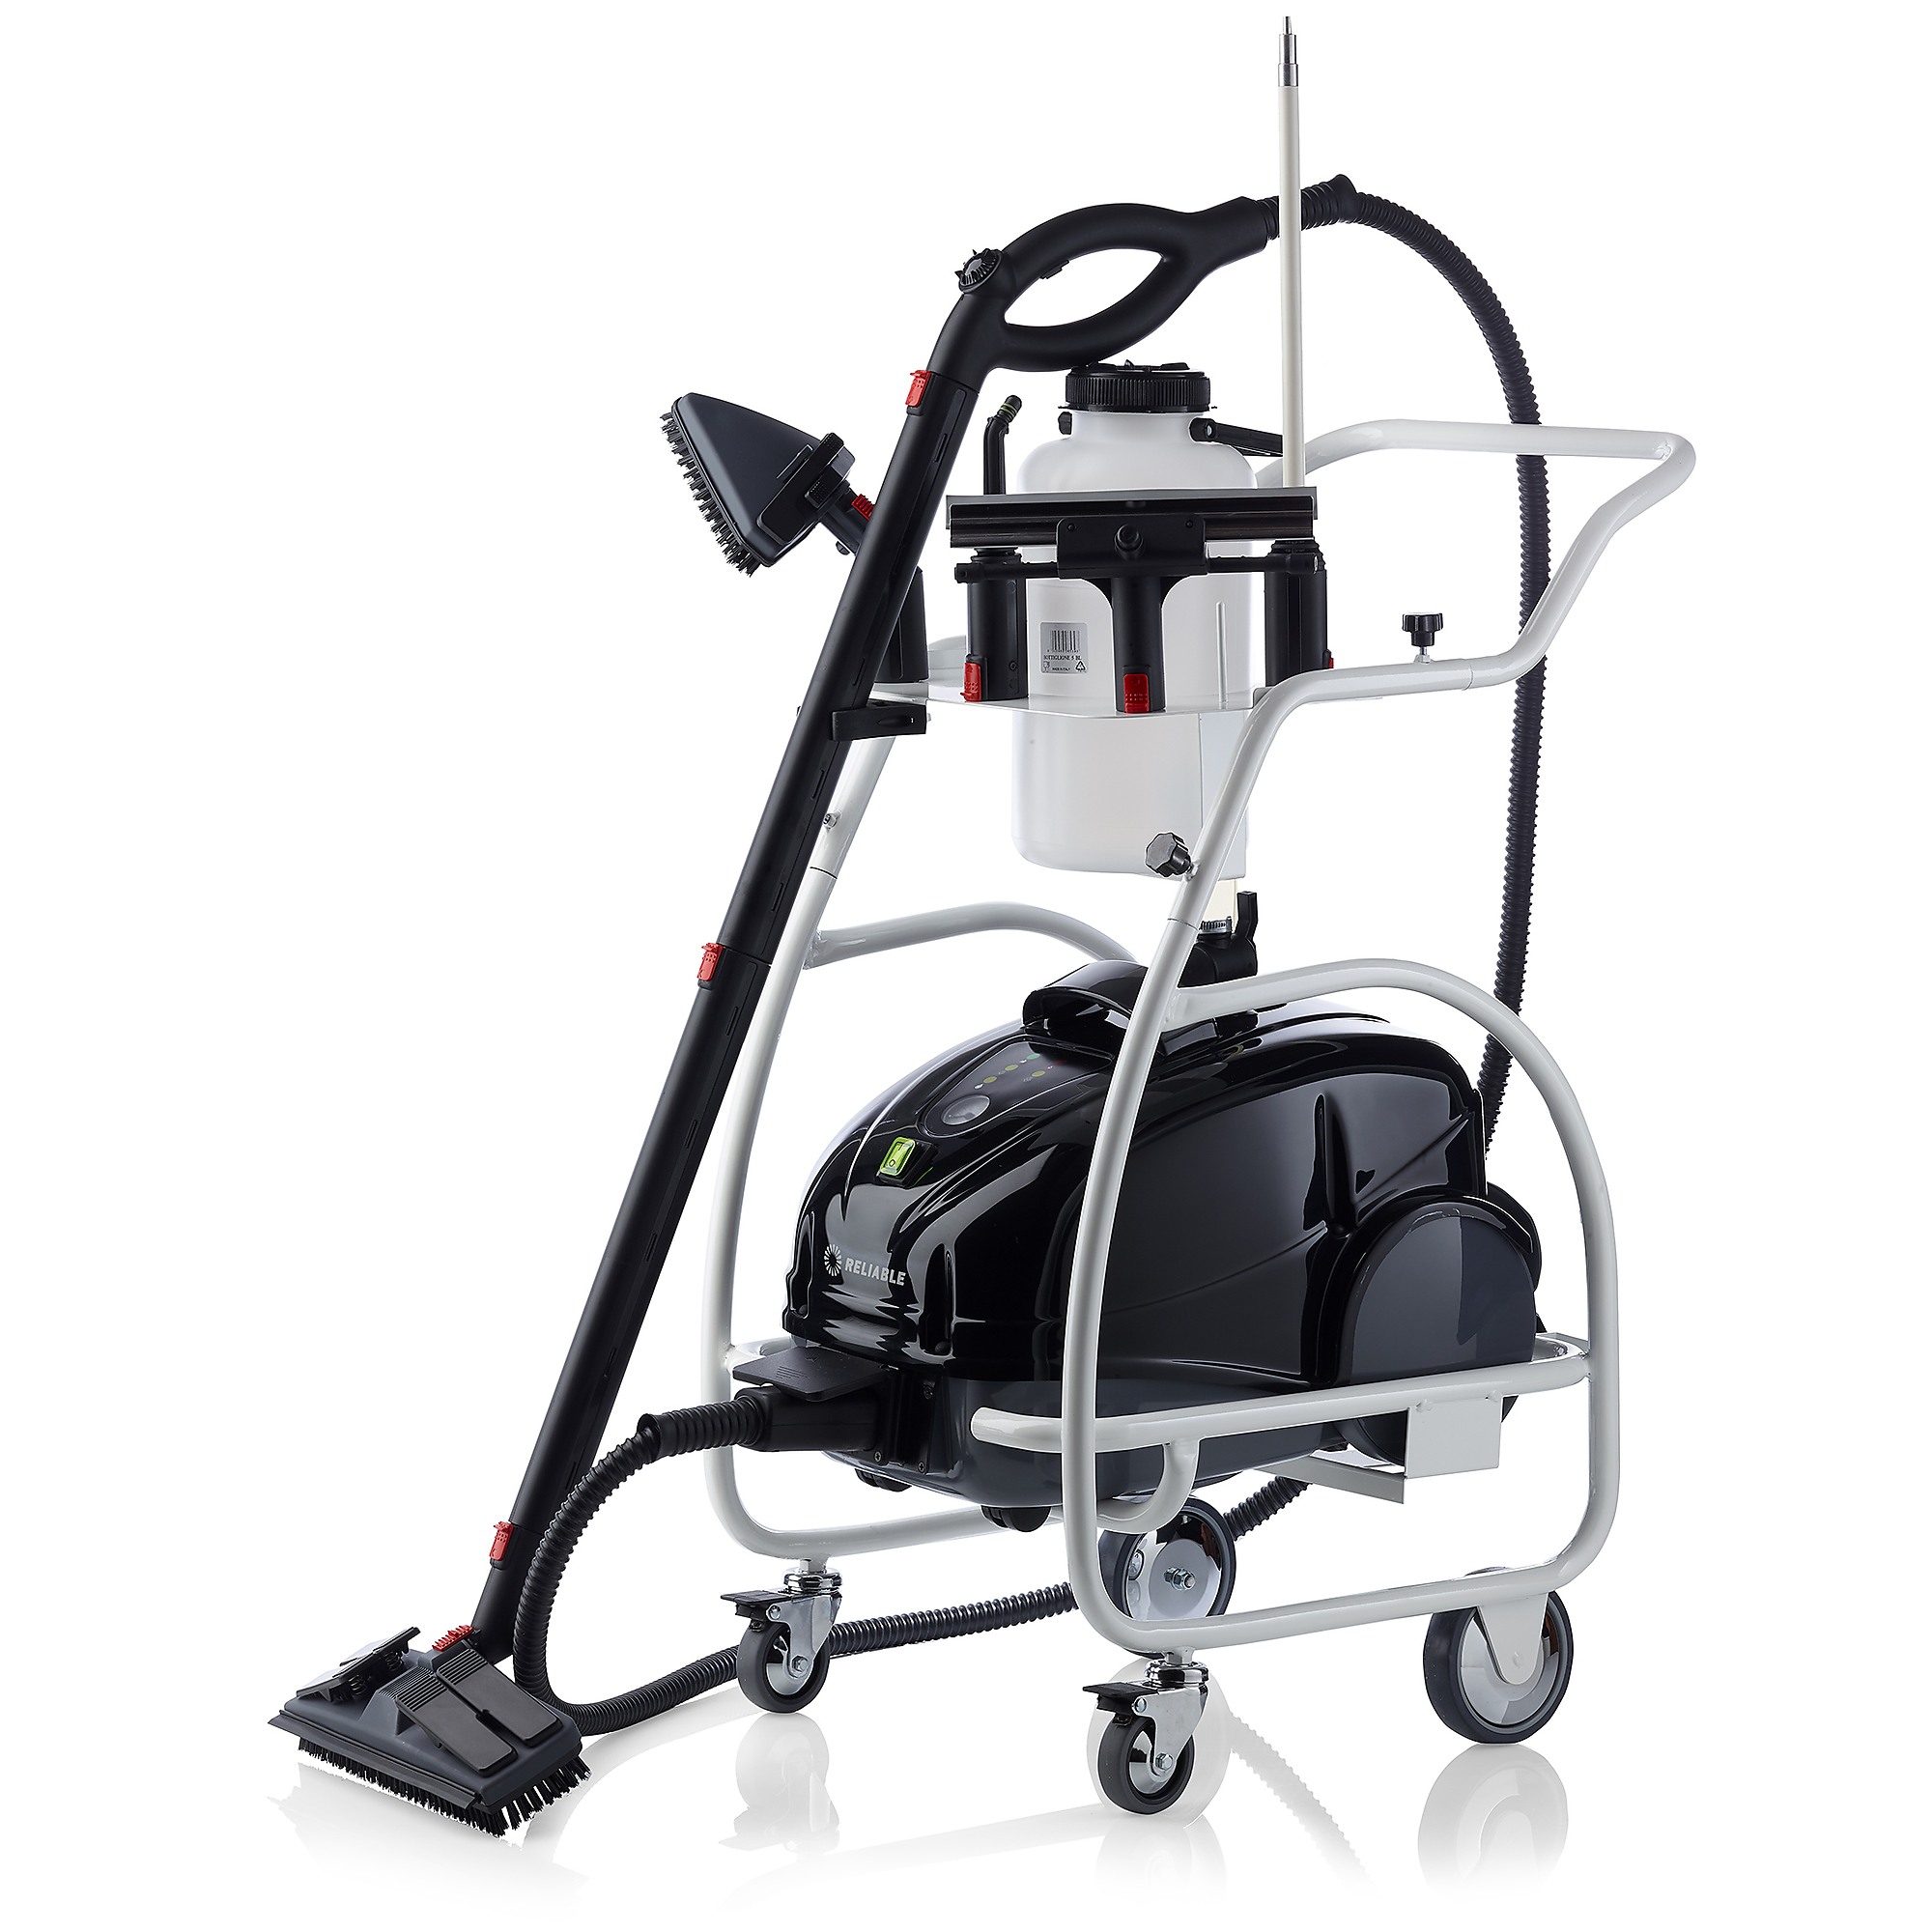 Brio Pro Cleaner With Trolley, Capacity 1.32 Gal, Max. Steam Pressure 87 PSI, Model - Reliable 1000CC/CT